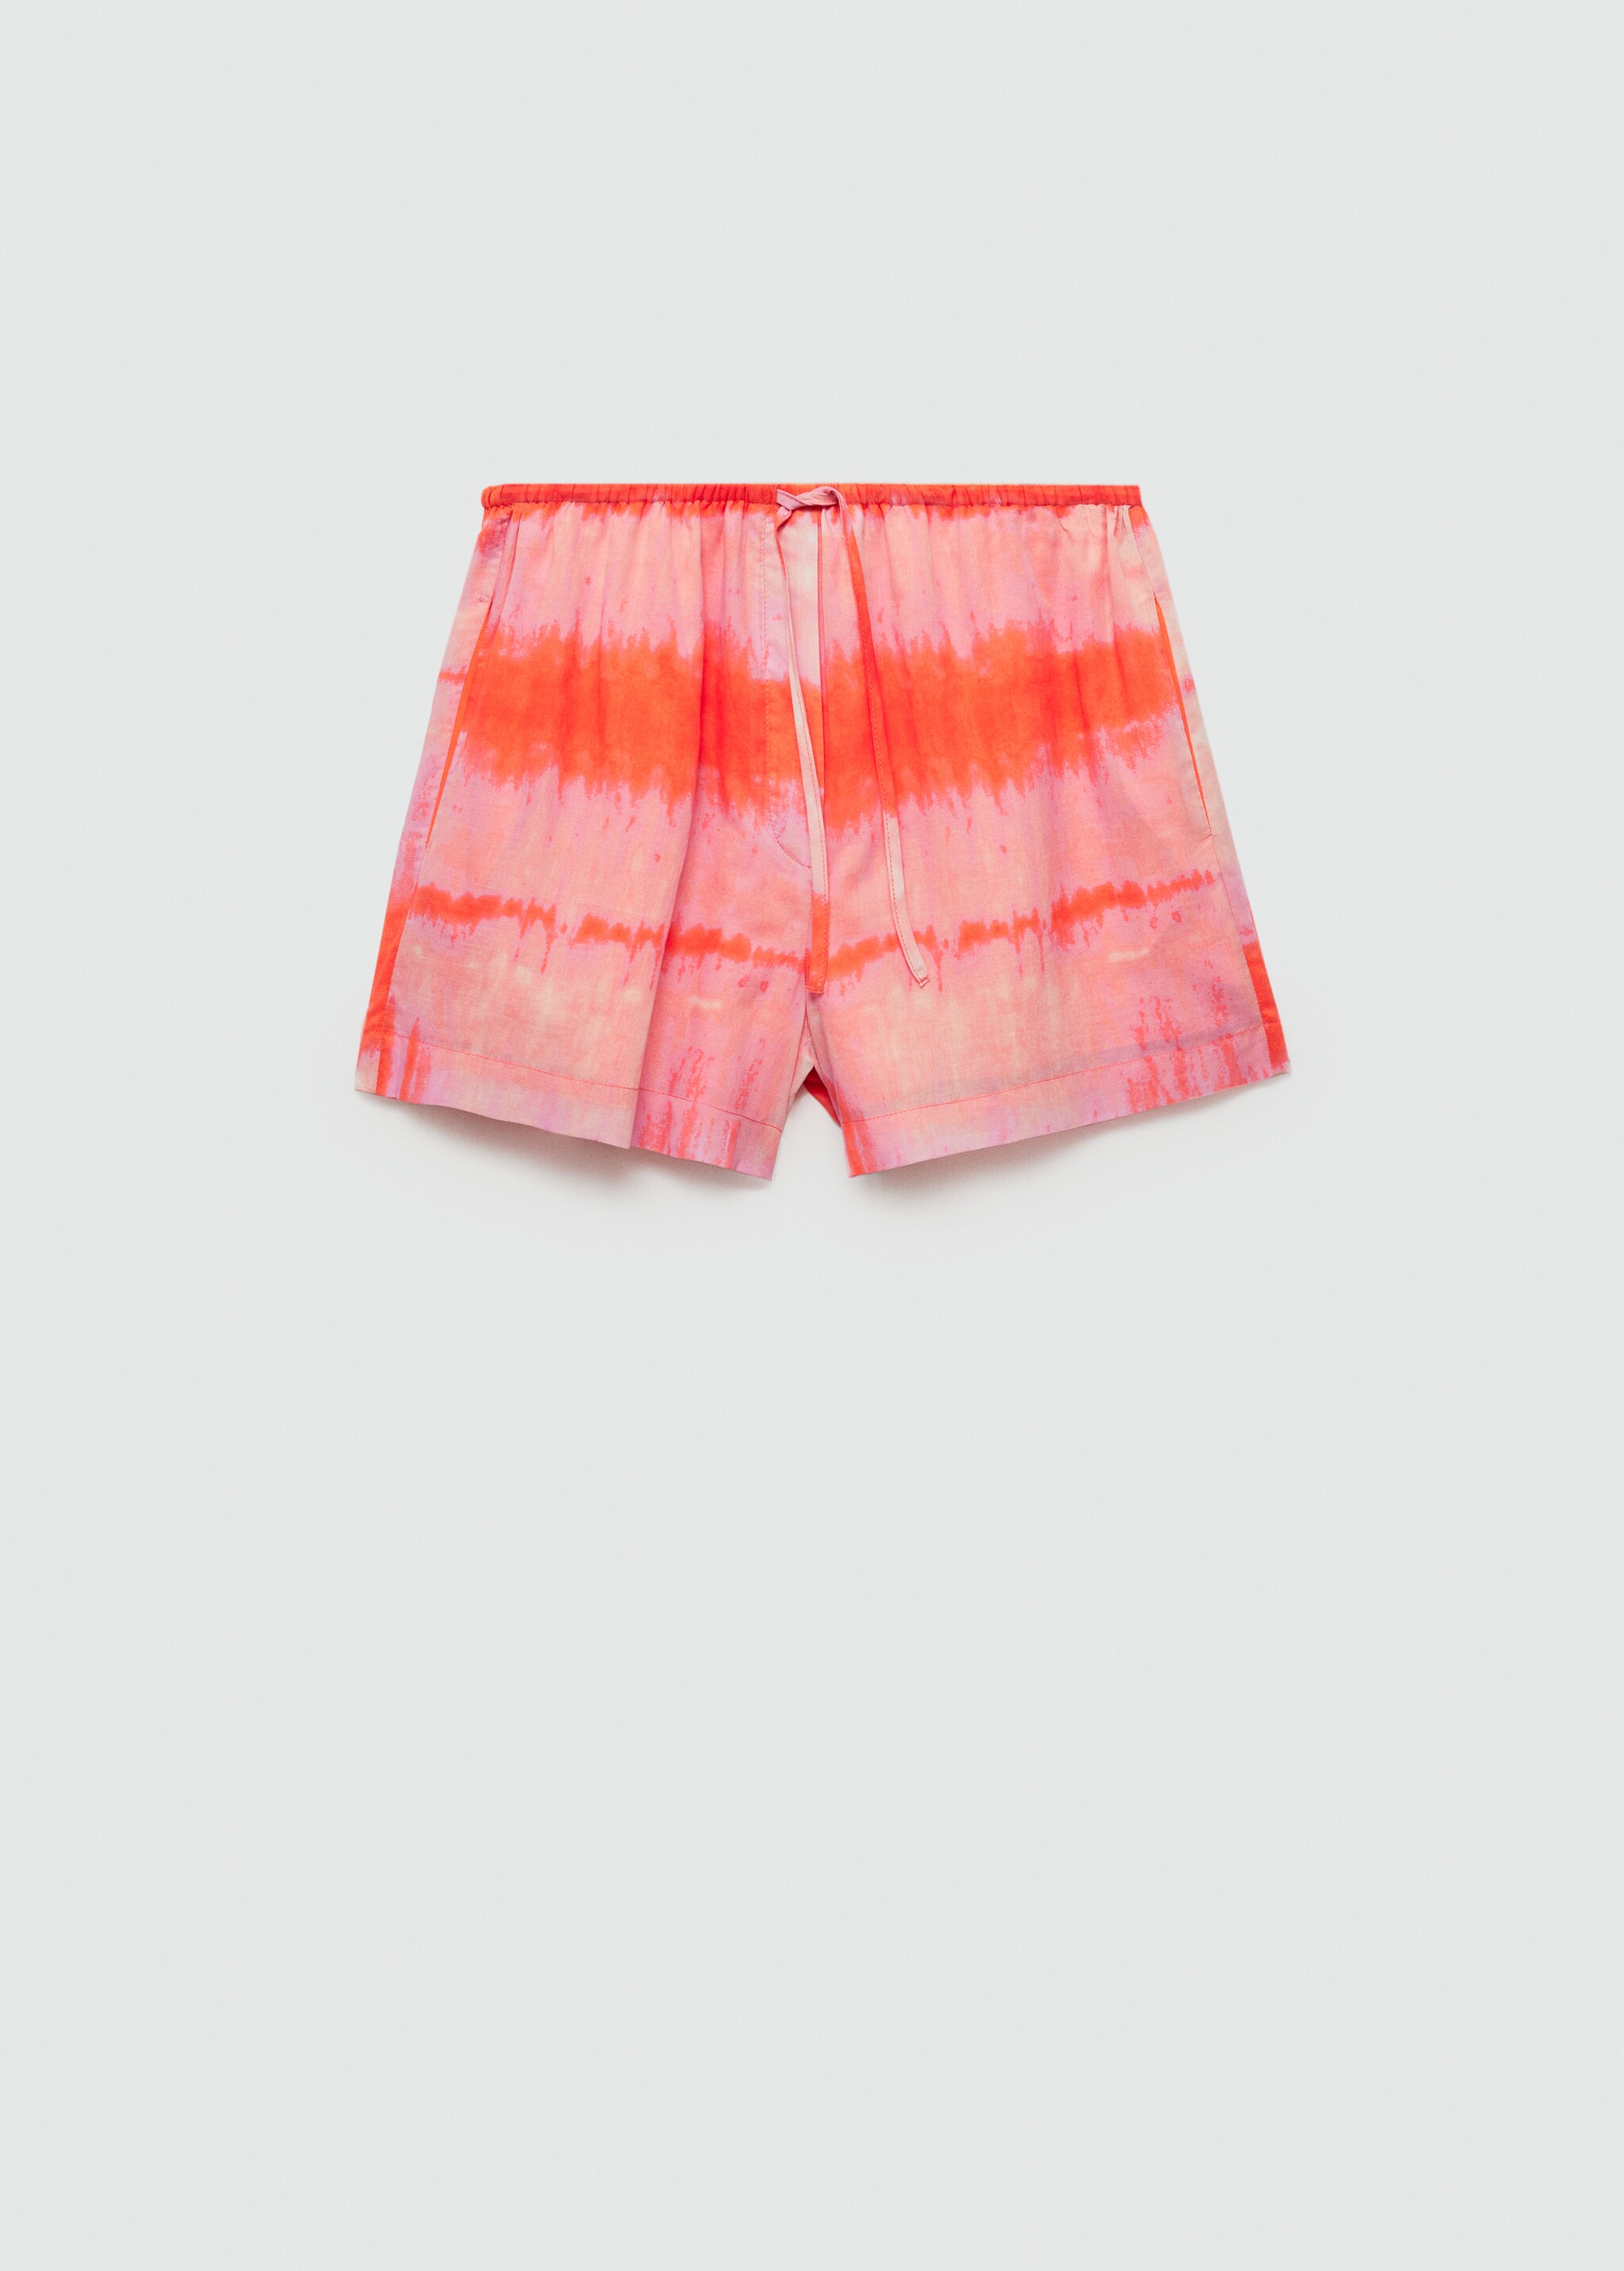 Printed shorts with elastic waist - Article without model